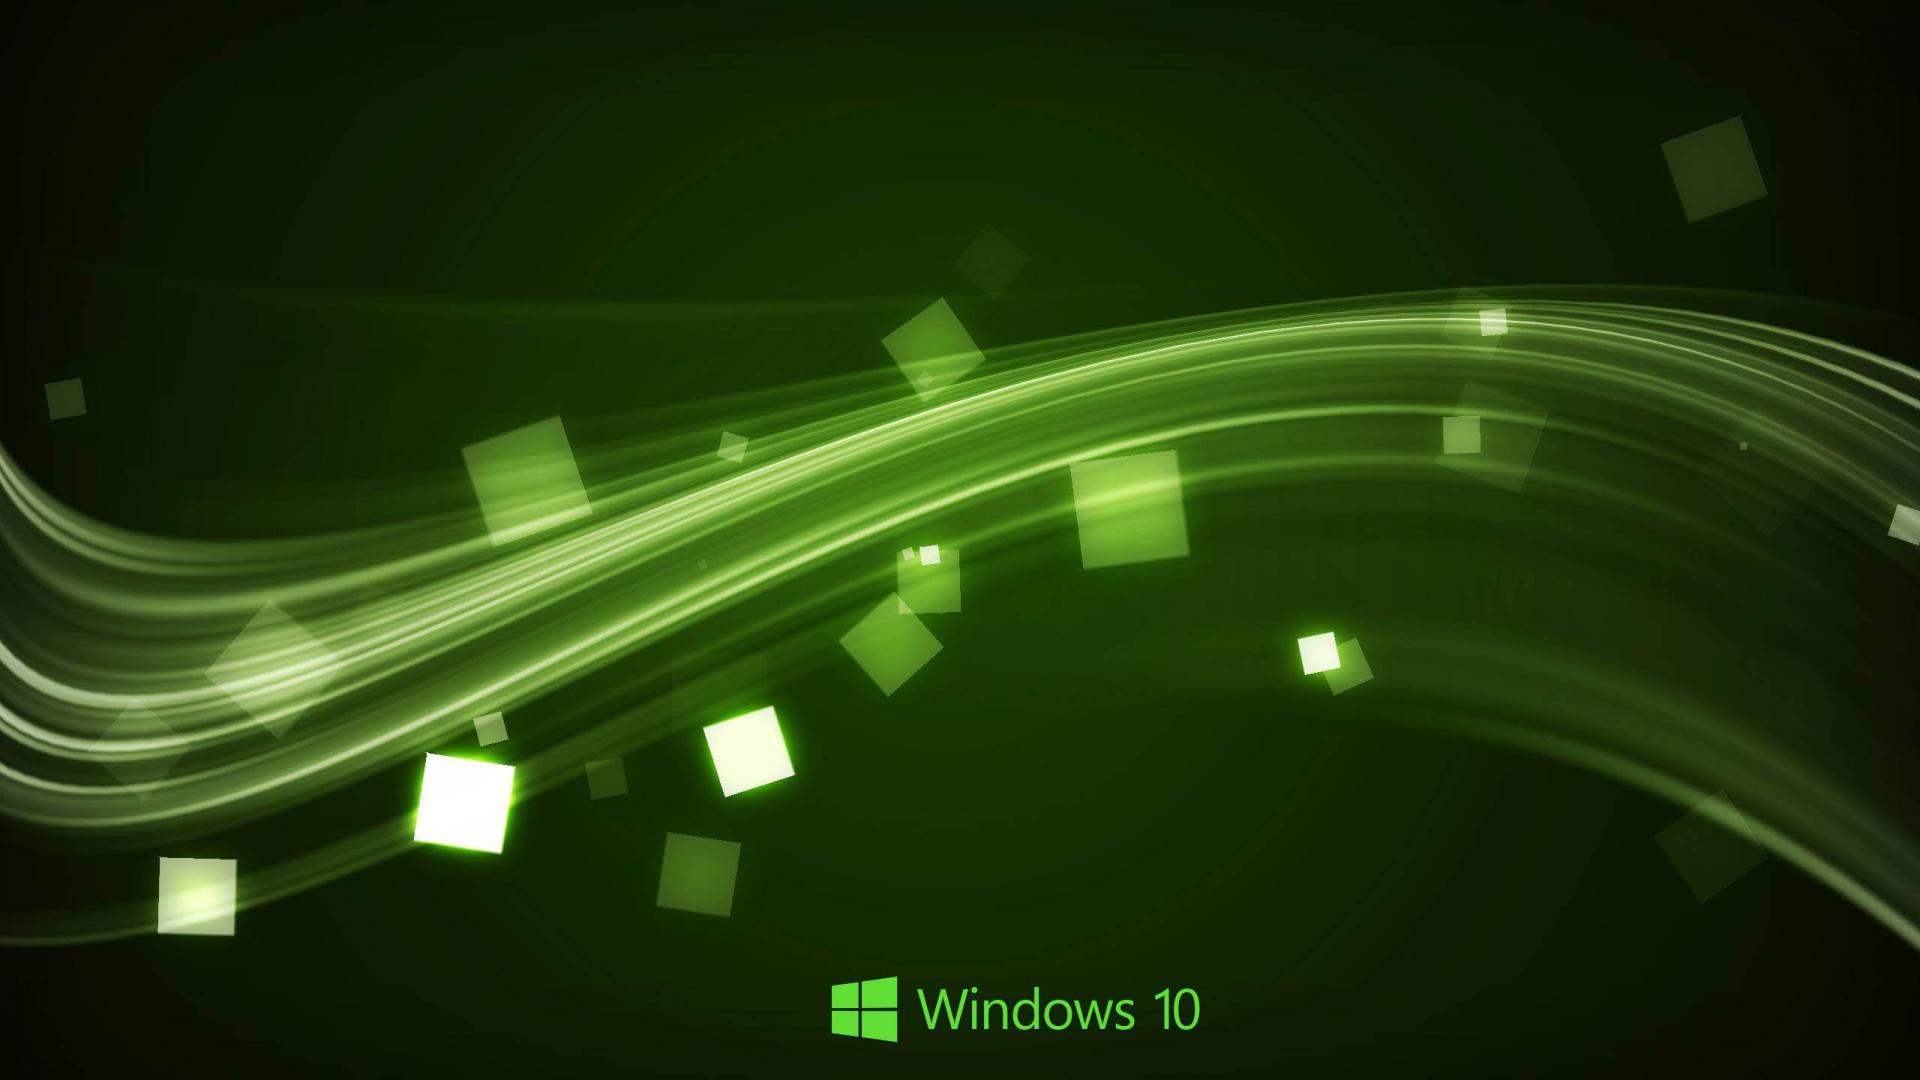 Windows 10 Wallpaper in Abstract Green Waves HD Wallpapers for Free